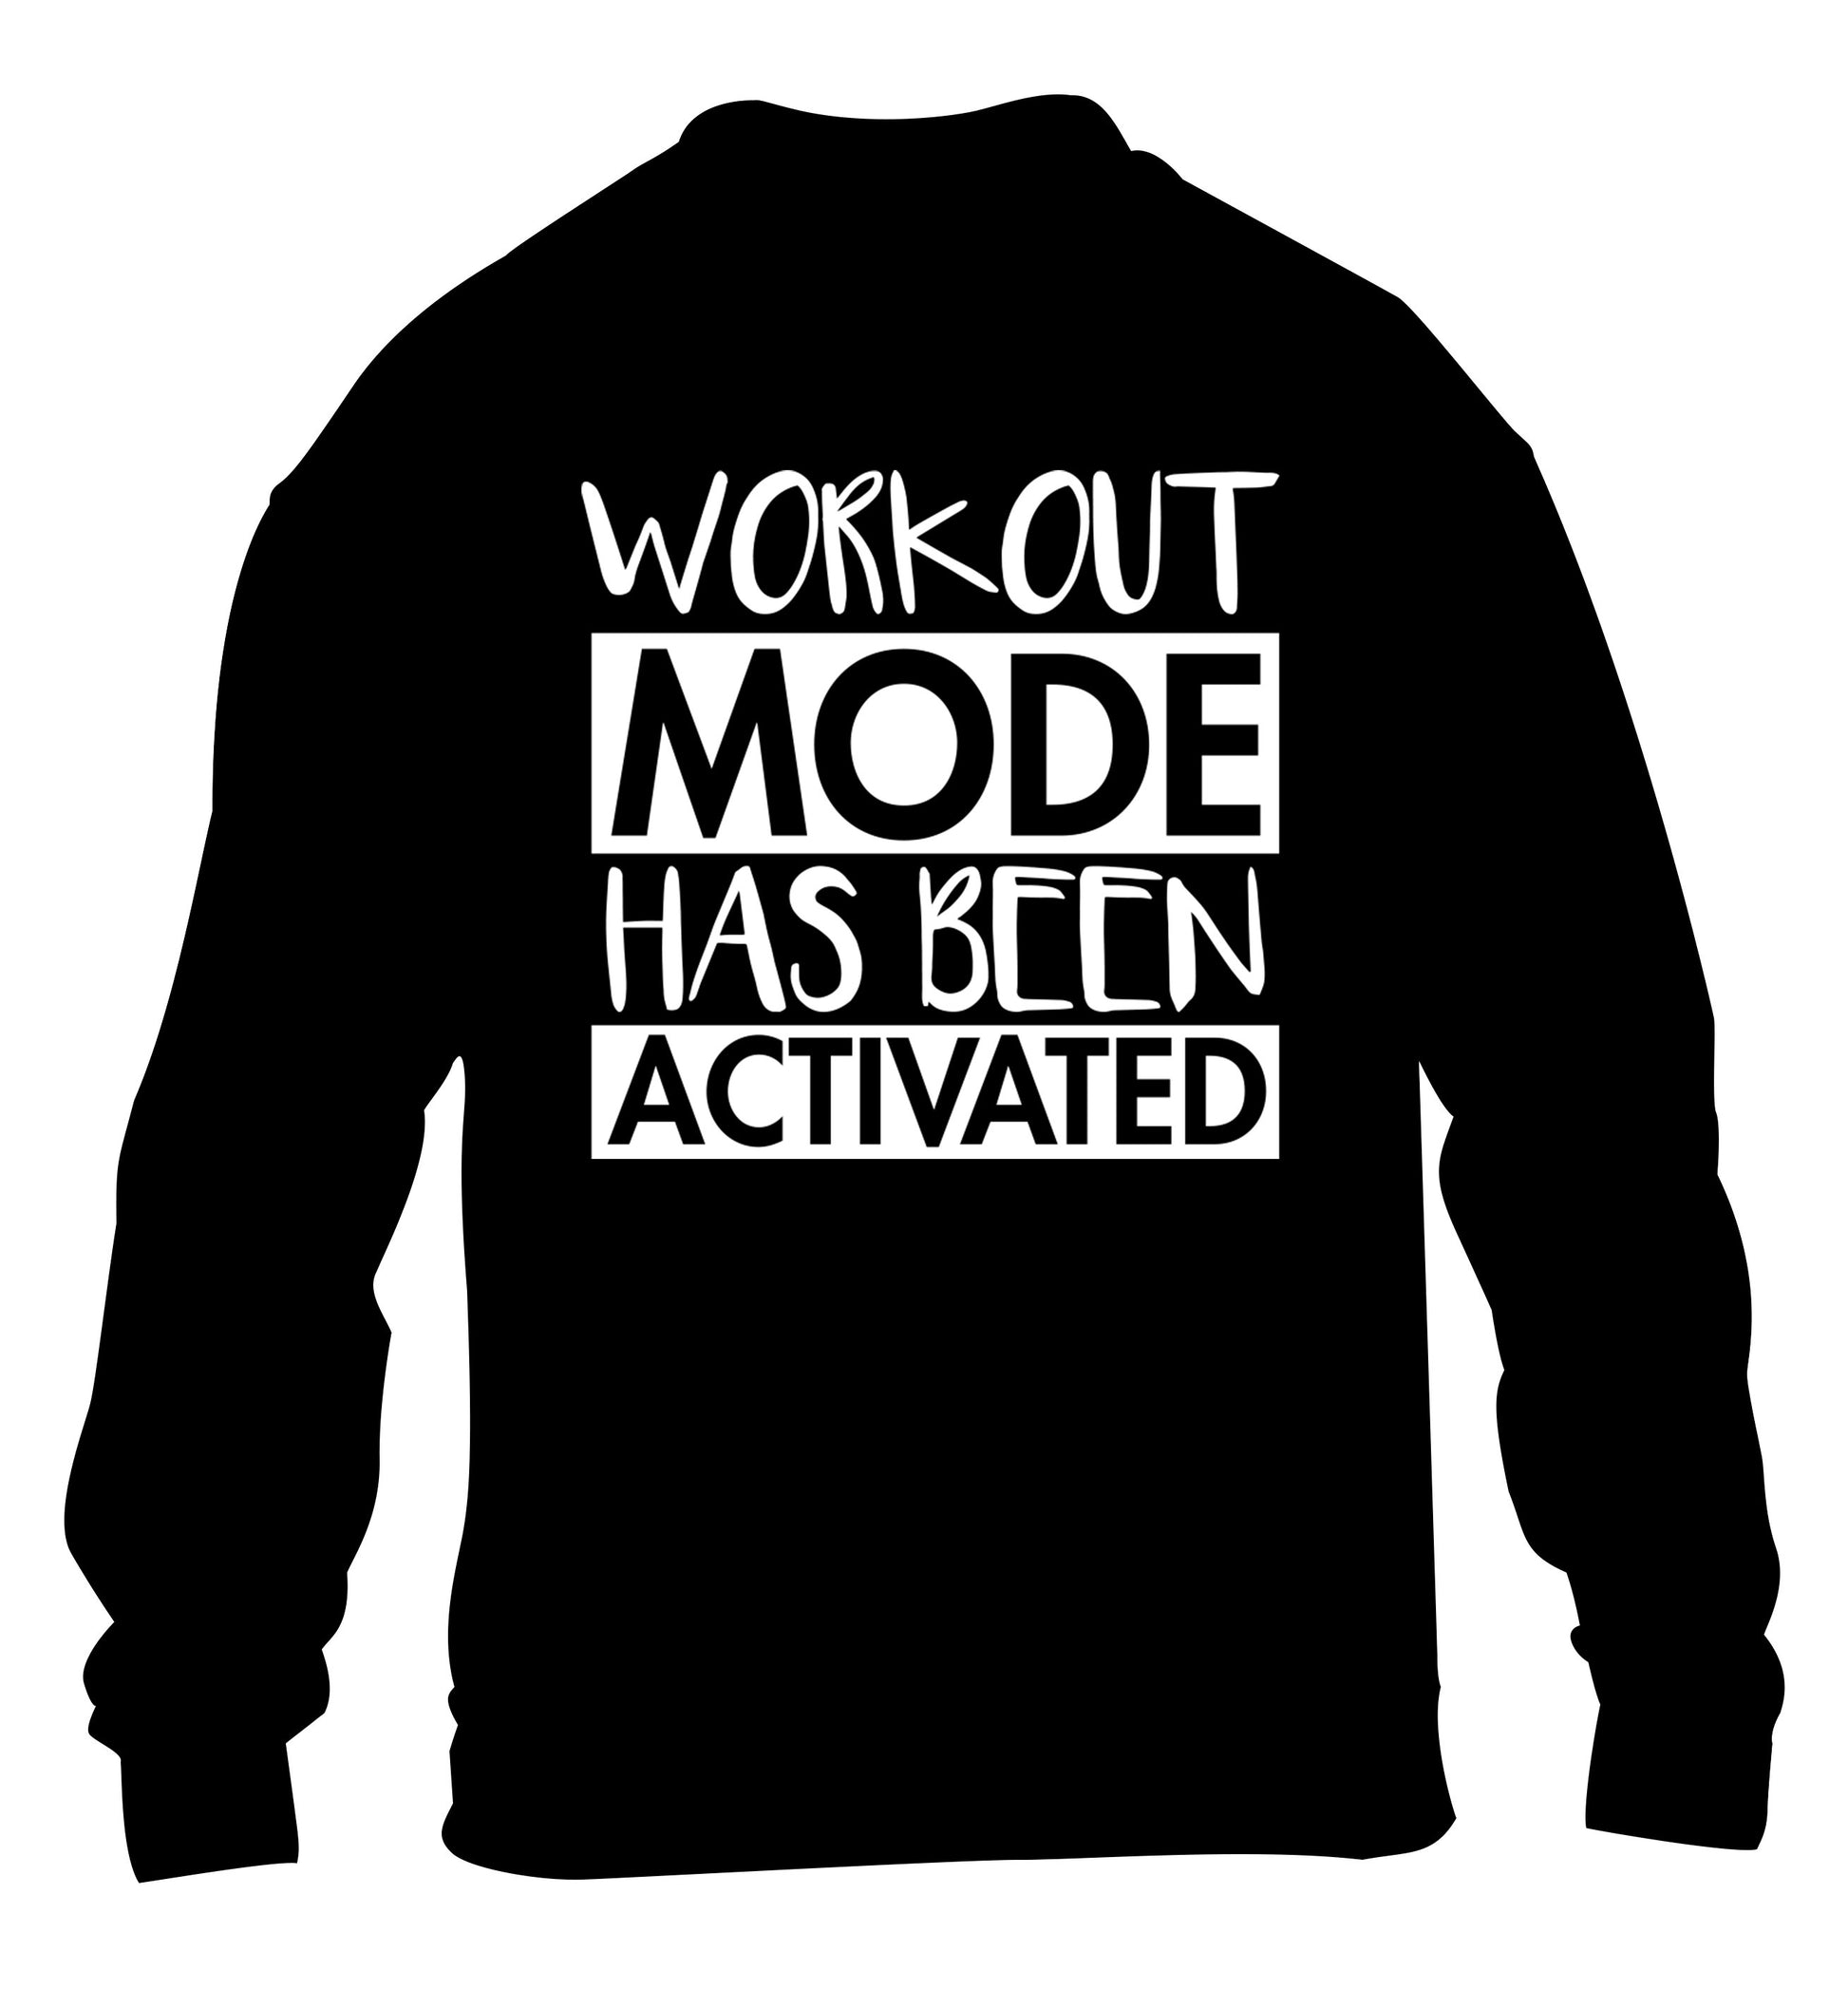 Workout mode has been activated children's black sweater 12-14 Years